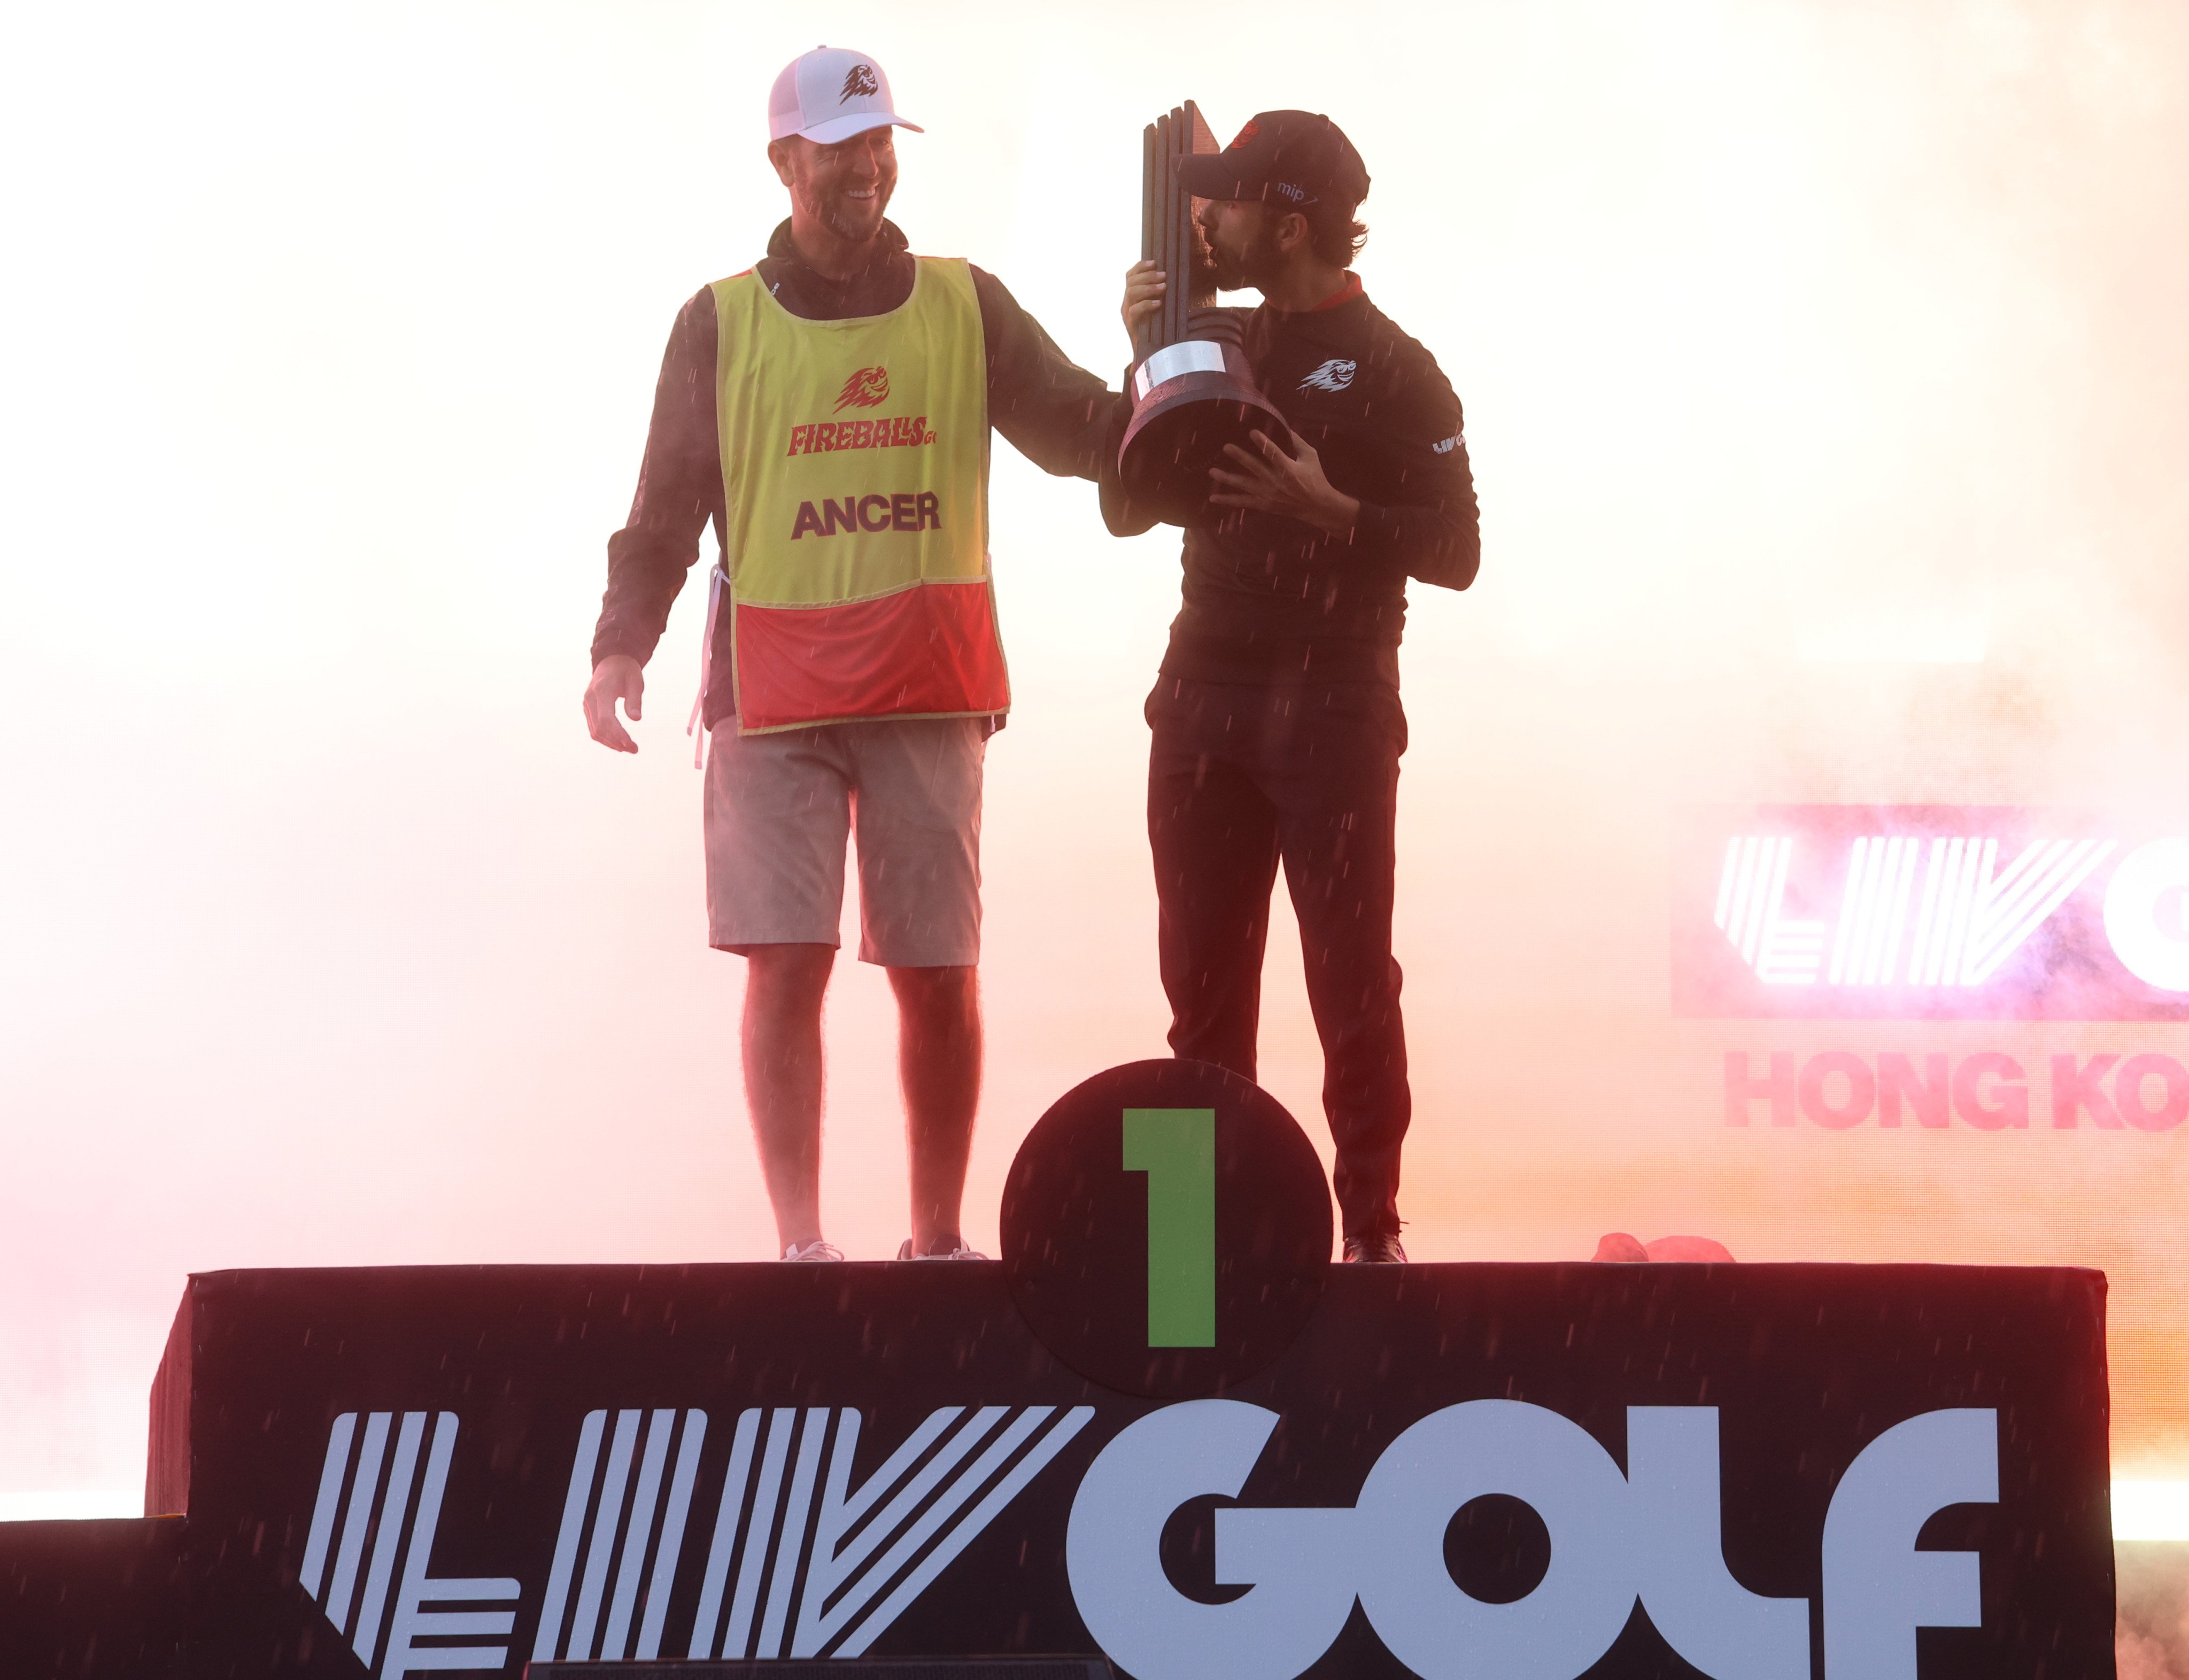 Caddie Dale Vallely (left) and Abraham Ancer celebrate after winning LIV Golf Hong Kong. Photo: Dickson Lee